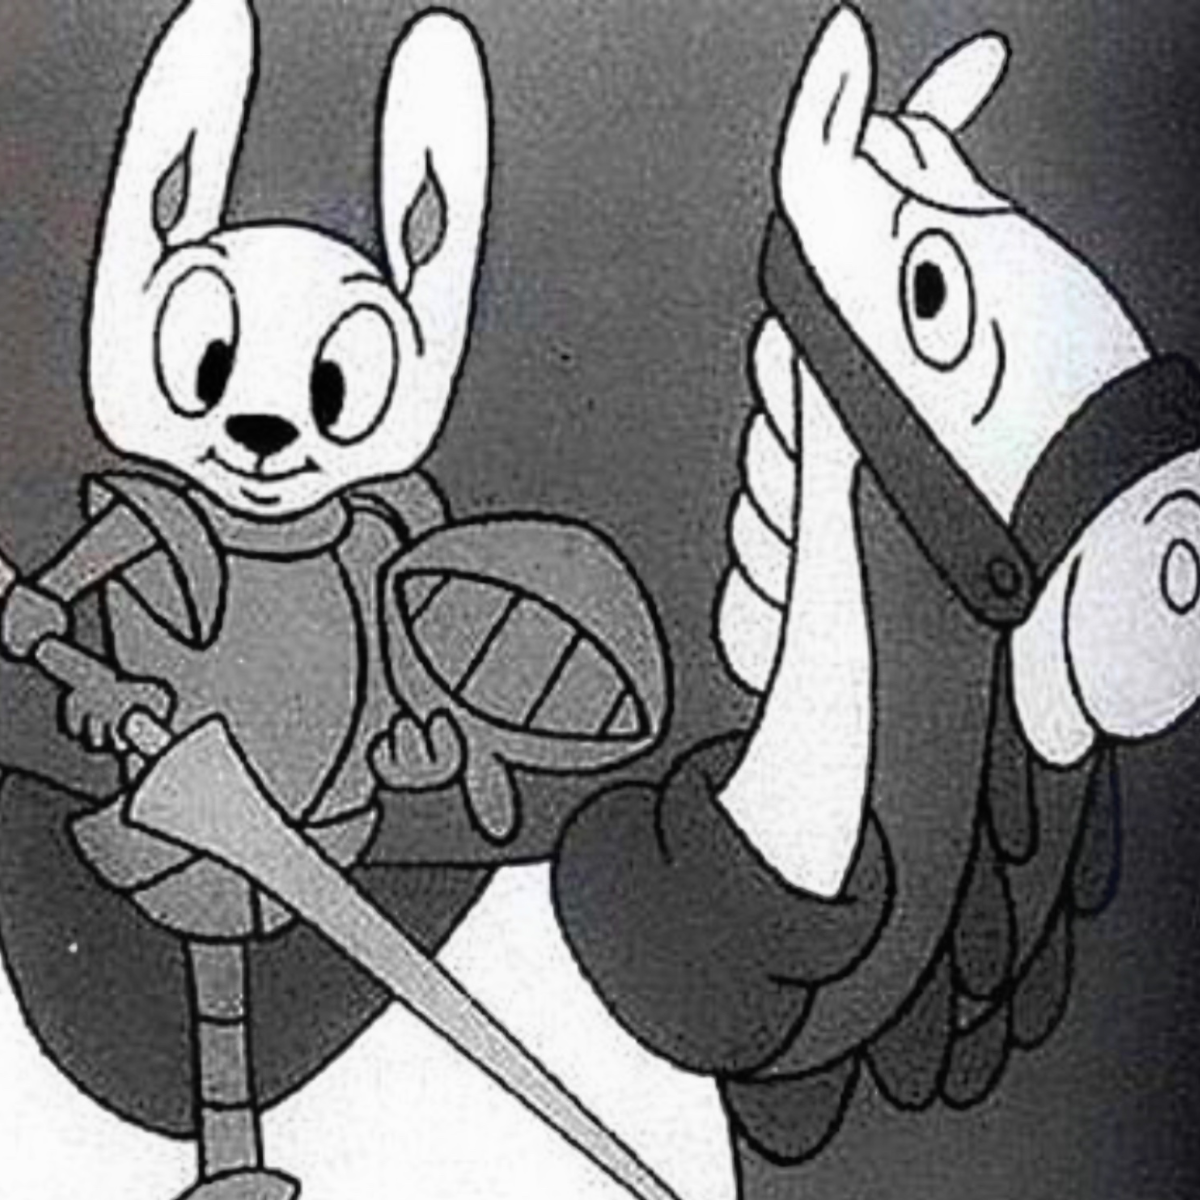 Crusader Rabbit: The Classic Cartoon that Paved the Way